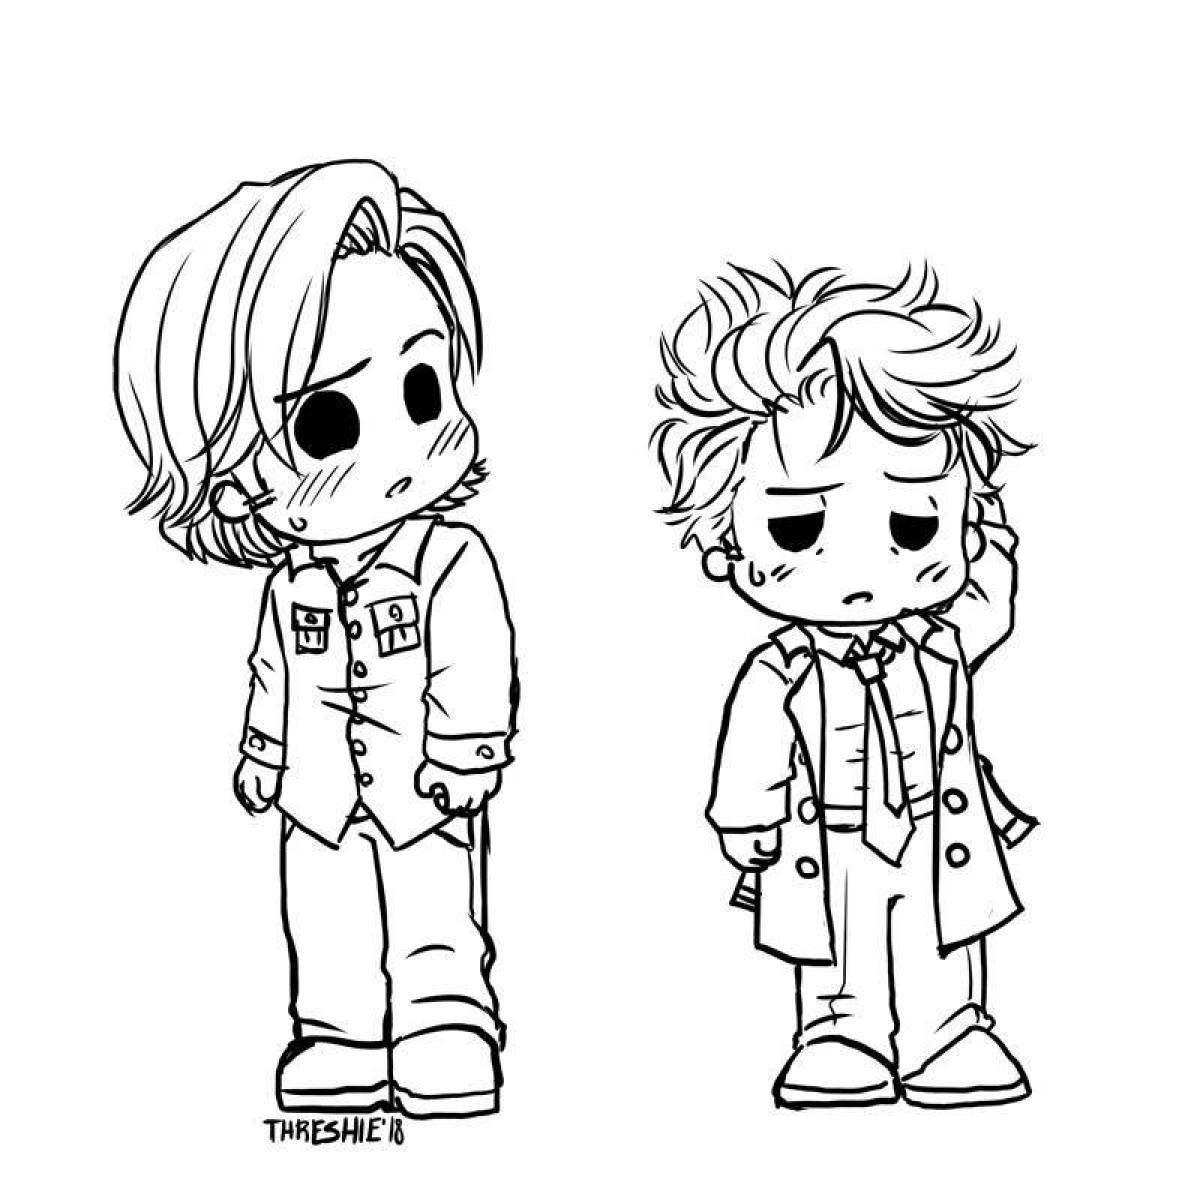 Fancy supernatural academy coloring book